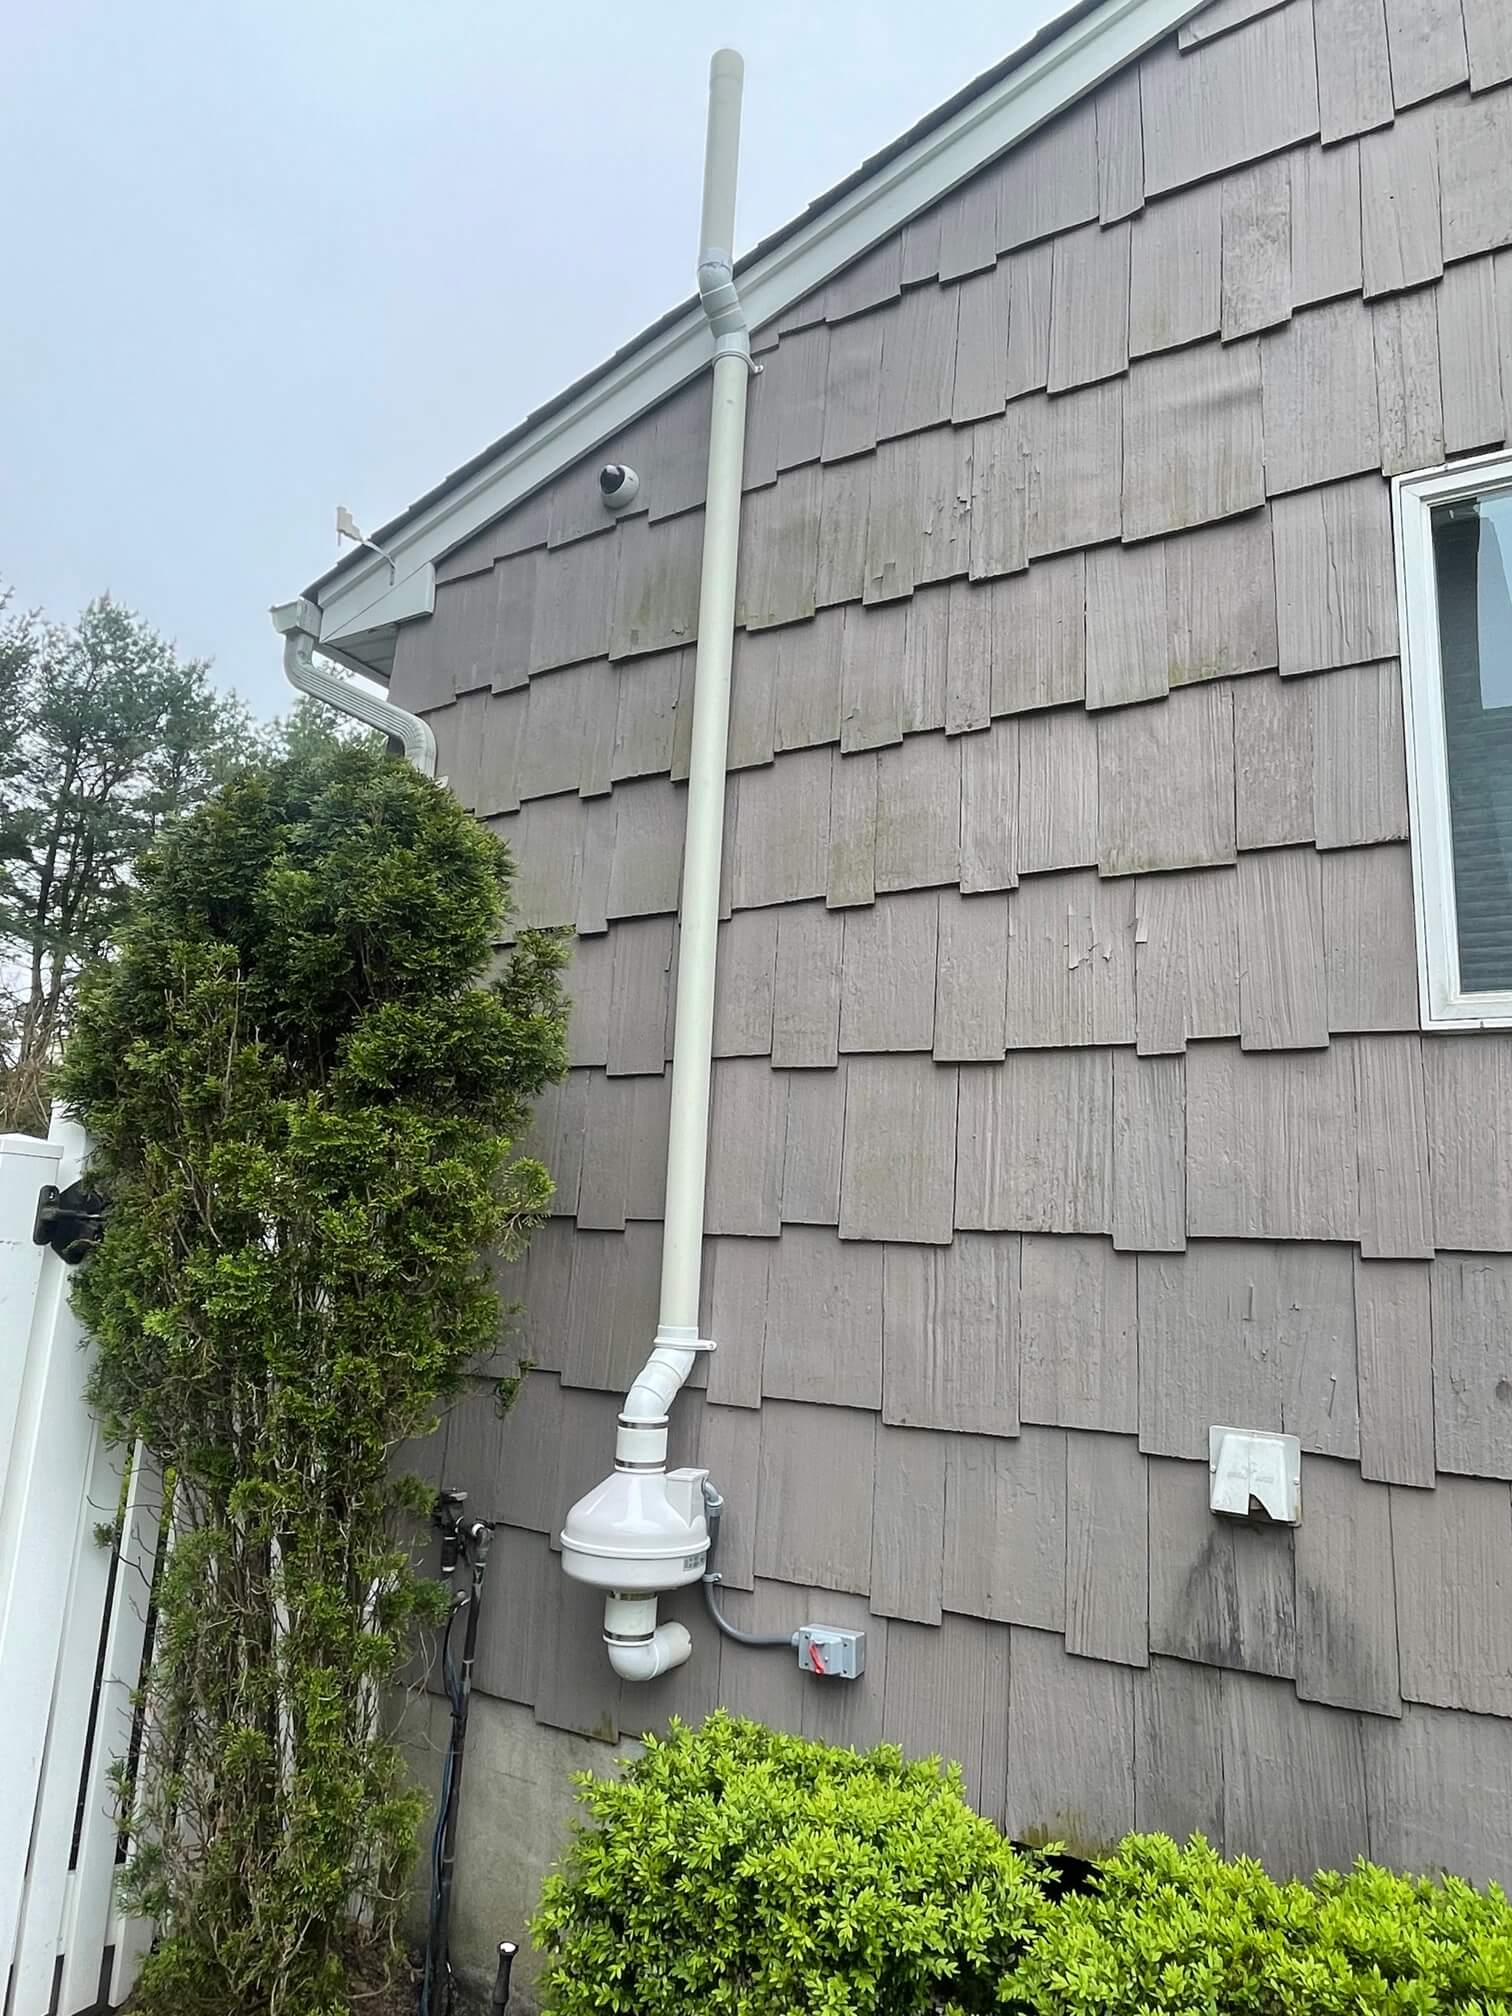 Radon mitigation system vent pipe on a house exterior